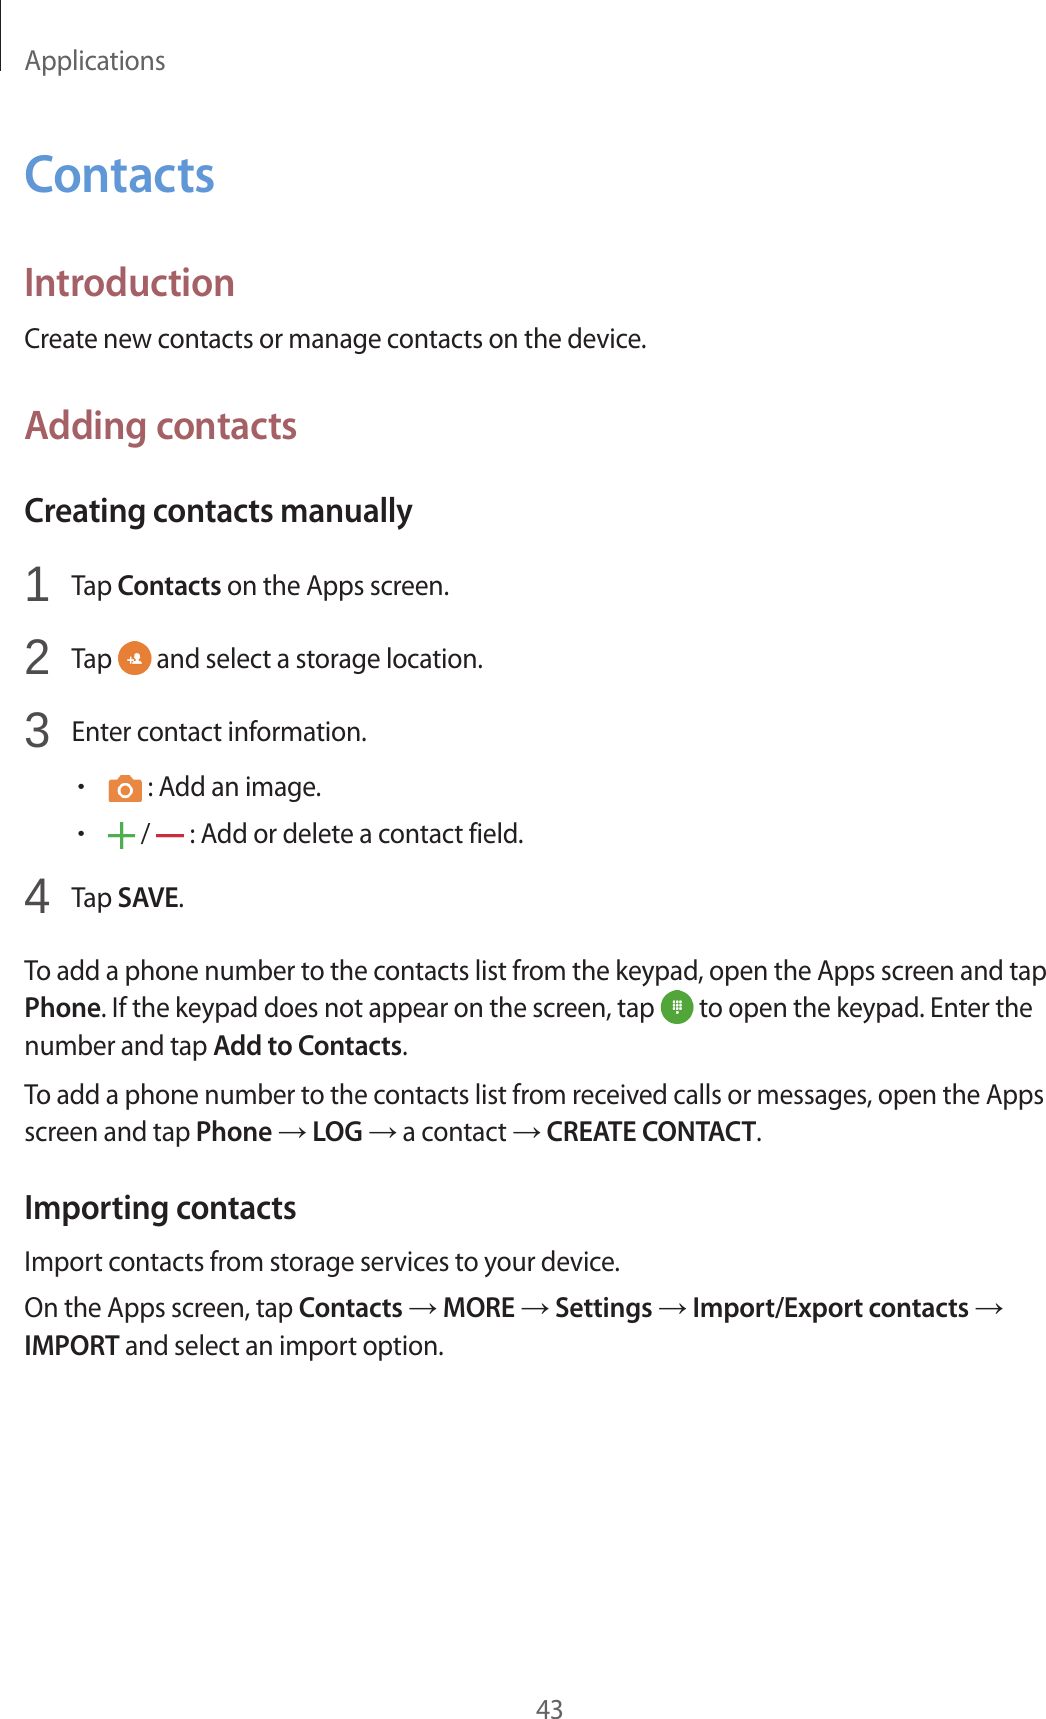 Applications43ContactsIntroductionCreate new contacts or manage contacts on the device.Adding contactsCreating contacts manually1  Tap Contacts on the Apps screen.2  Tap   and select a storage location.3  Enter contact information.• : Add an image.• /   : Add or delete a contact field.4  Tap SAVE.To add a phone number to the contacts list from the keypad, open the Apps screen and tap Phone. If the keypad does not appear on the screen, tap   to open the keypad. Enter the number and tap Add to Contacts.To add a phone number to the contacts list from received calls or messages, open the Apps screen and tap Phone → LOG → a contact → CREATE CONTACT.Importing contactsImport contacts from storage services to your device.On the Apps screen, tap Contacts → MORE → Settings → Import/Export contacts → IMPORT and select an import option.